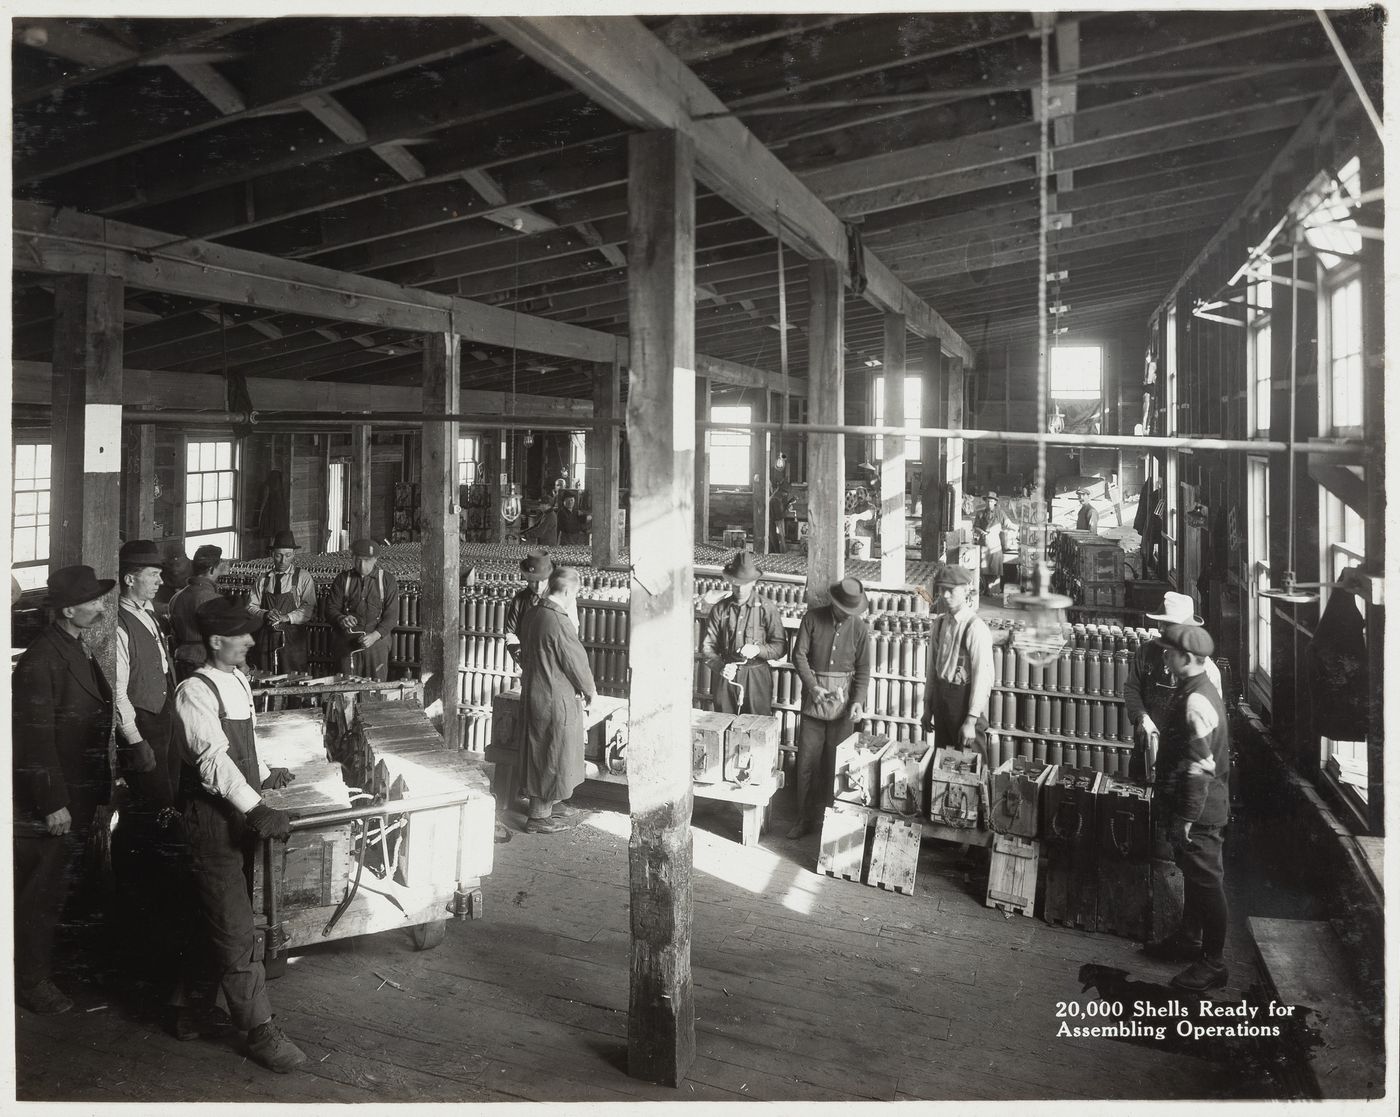 Interior view of workers with 20,000 shells ready for assembling operations at the Energite Explosives Plant No. 3, the Shell Loading Plant, Renfrew, Ontario, Canada